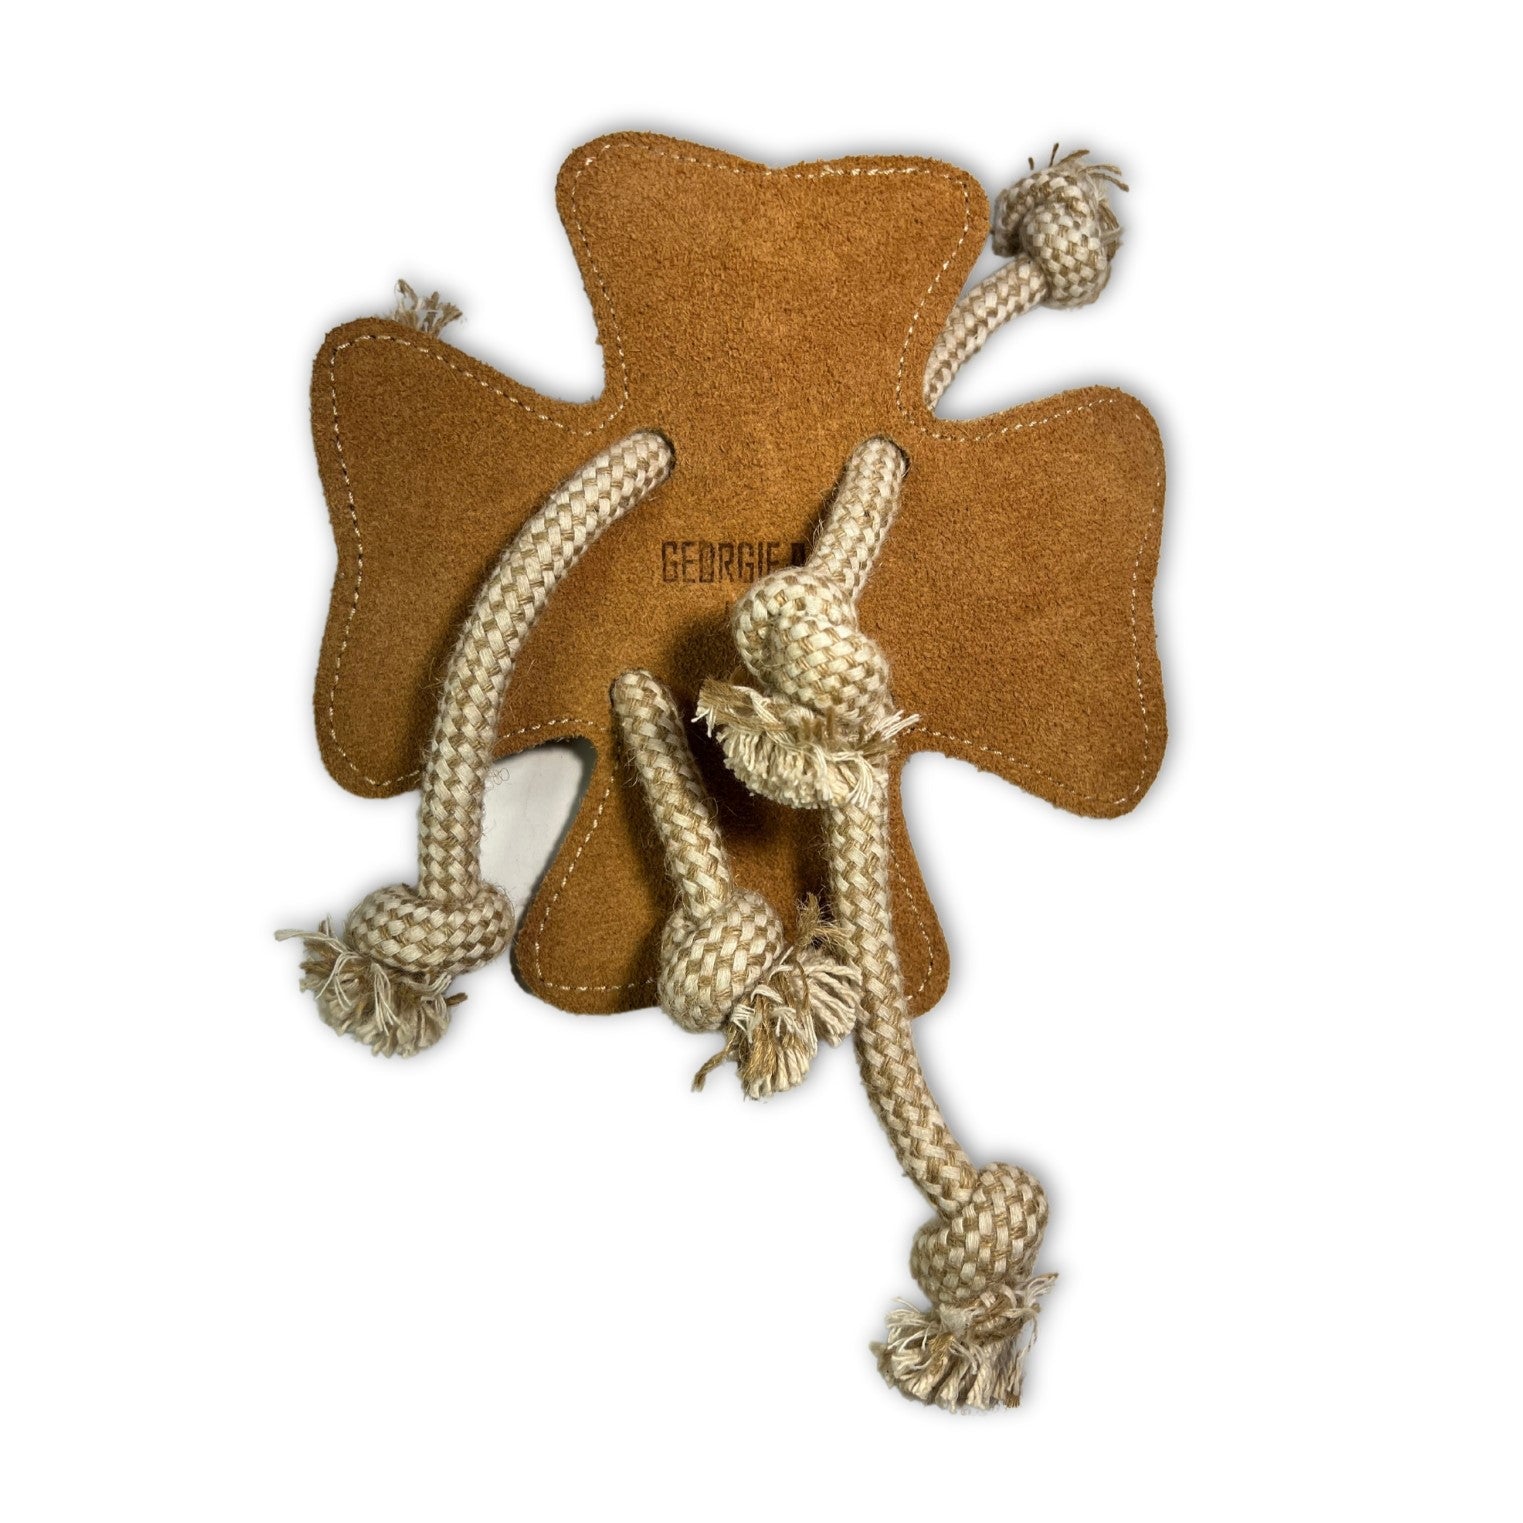 A brown, star-shaped dog toy made of Buffalo Suede with the name "Clover - Natural" embroidered in the center. It has four knotted rope legs extending from the sides, each ending in Georgie Paws.